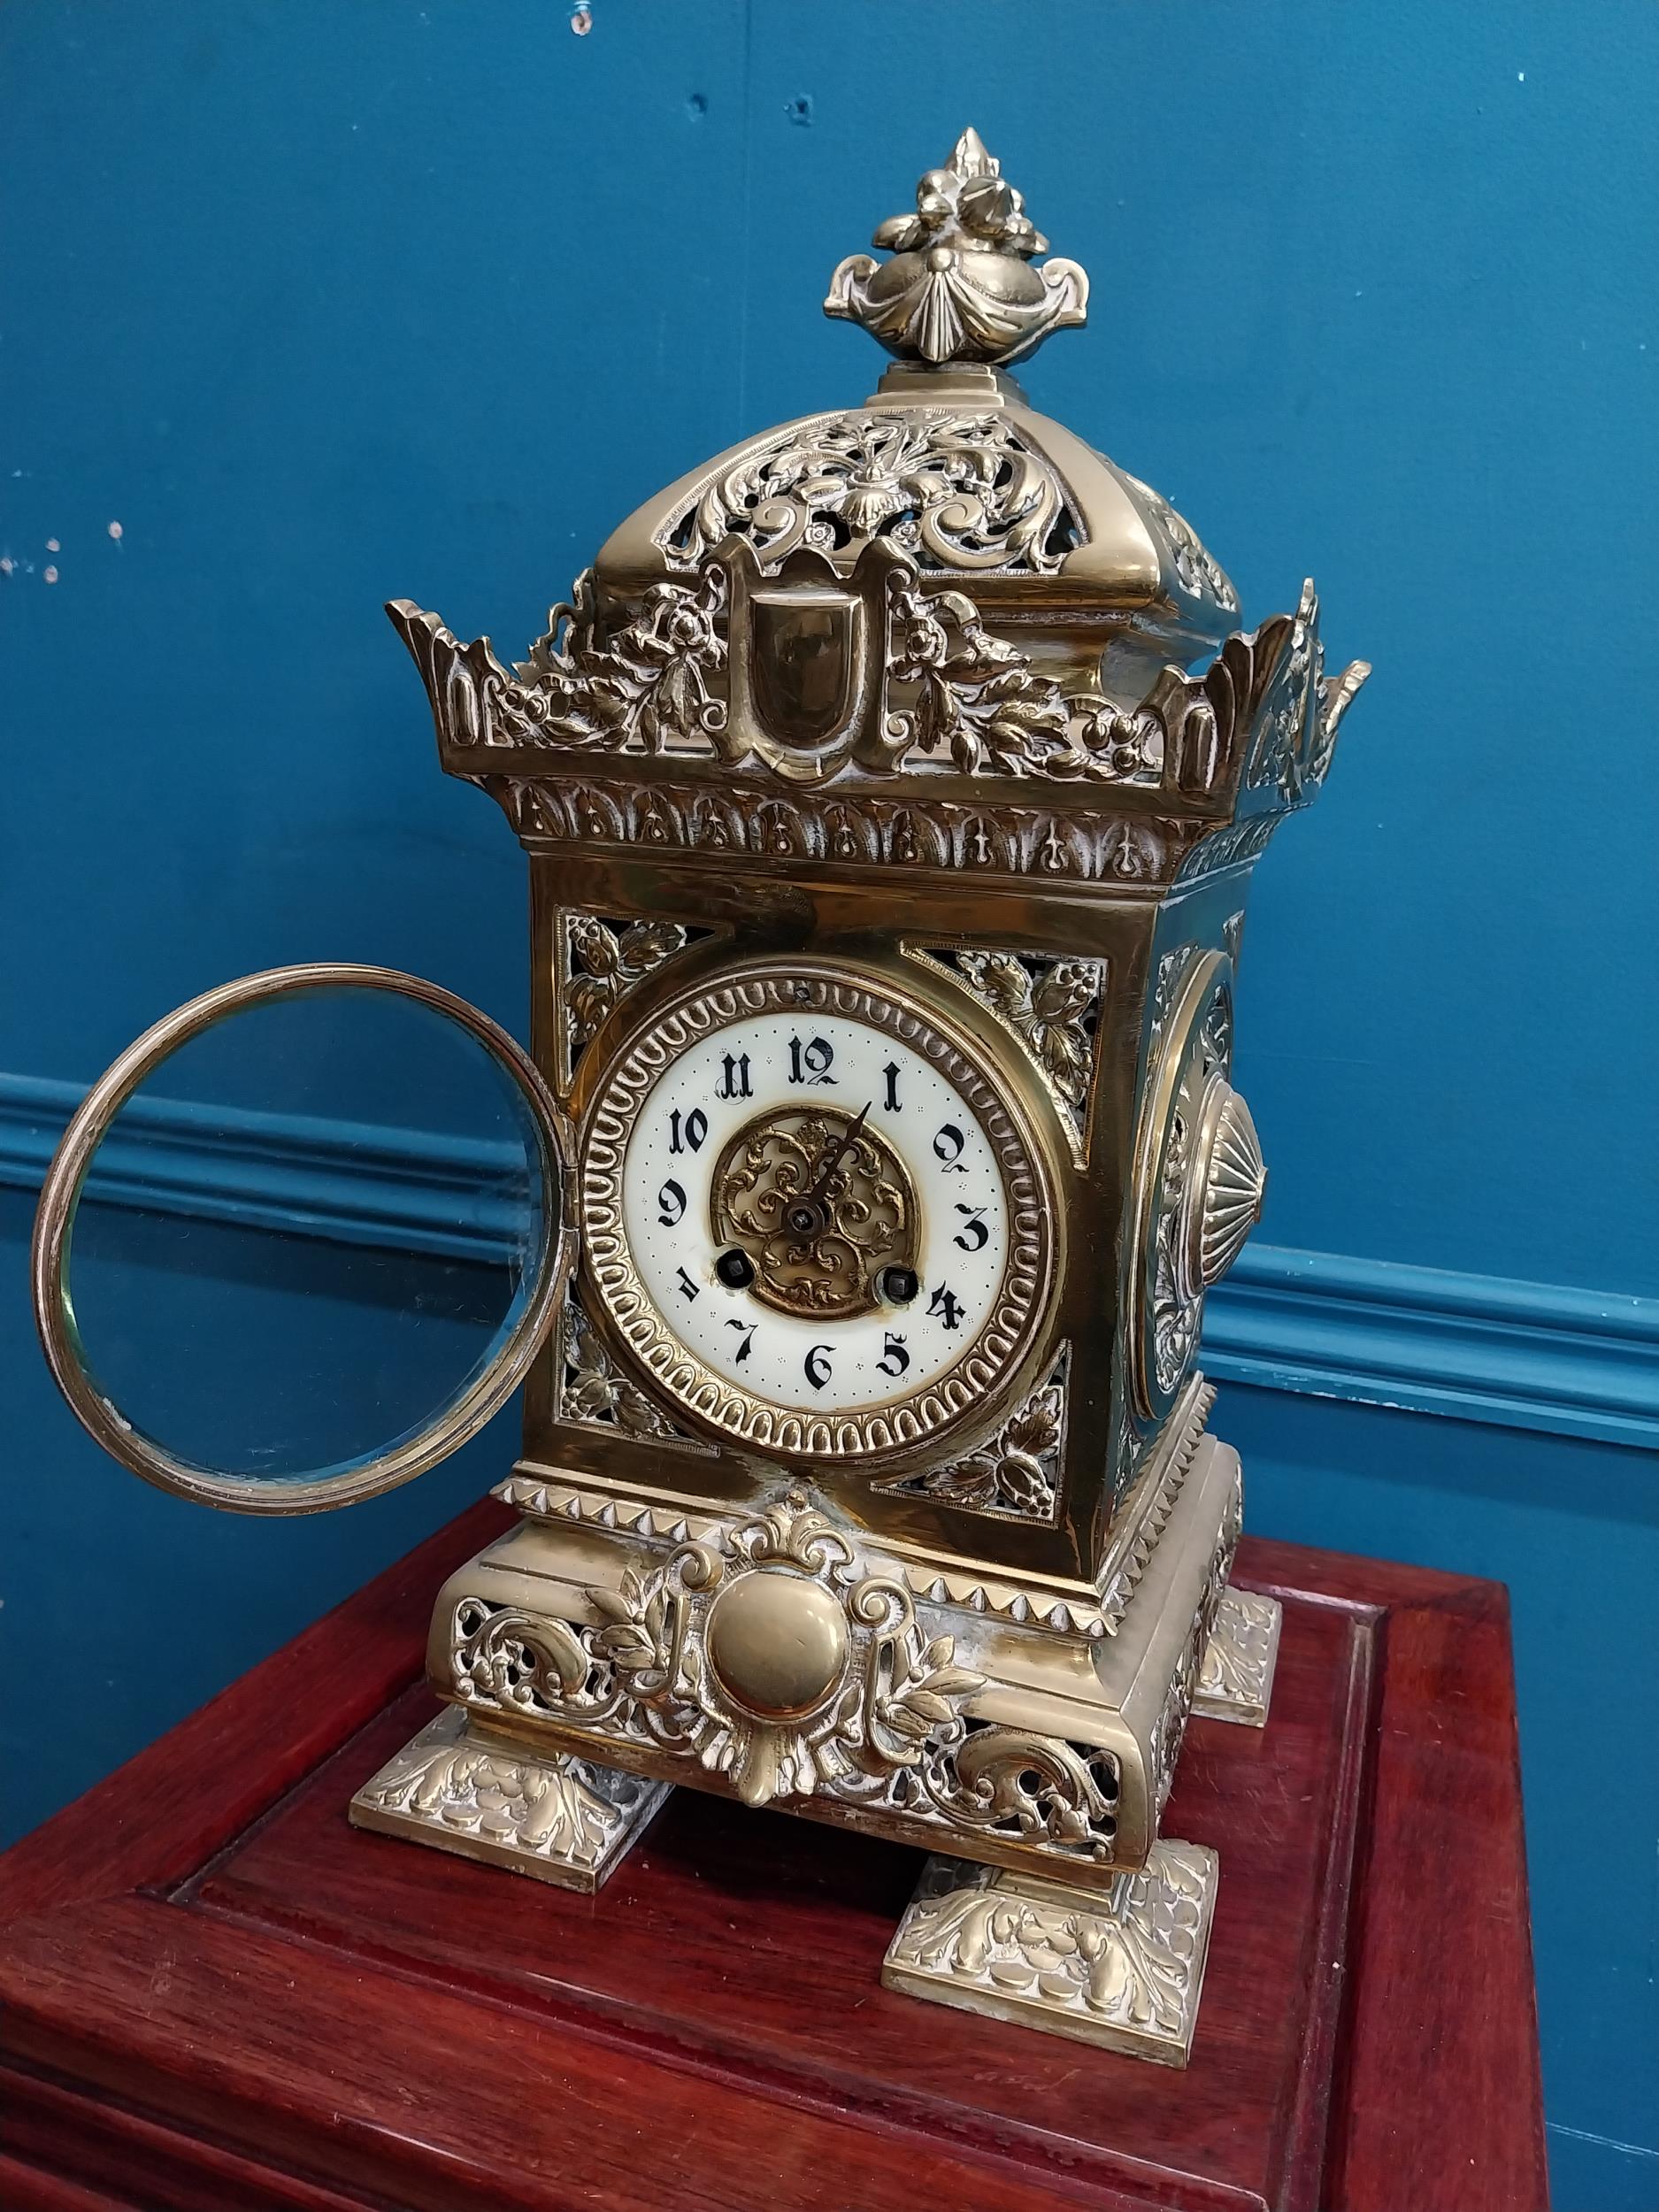 Decorative brass mantle clock in the Victorian style {39 cm H x 19 cm W x 19 cm D}. - Image 6 of 9